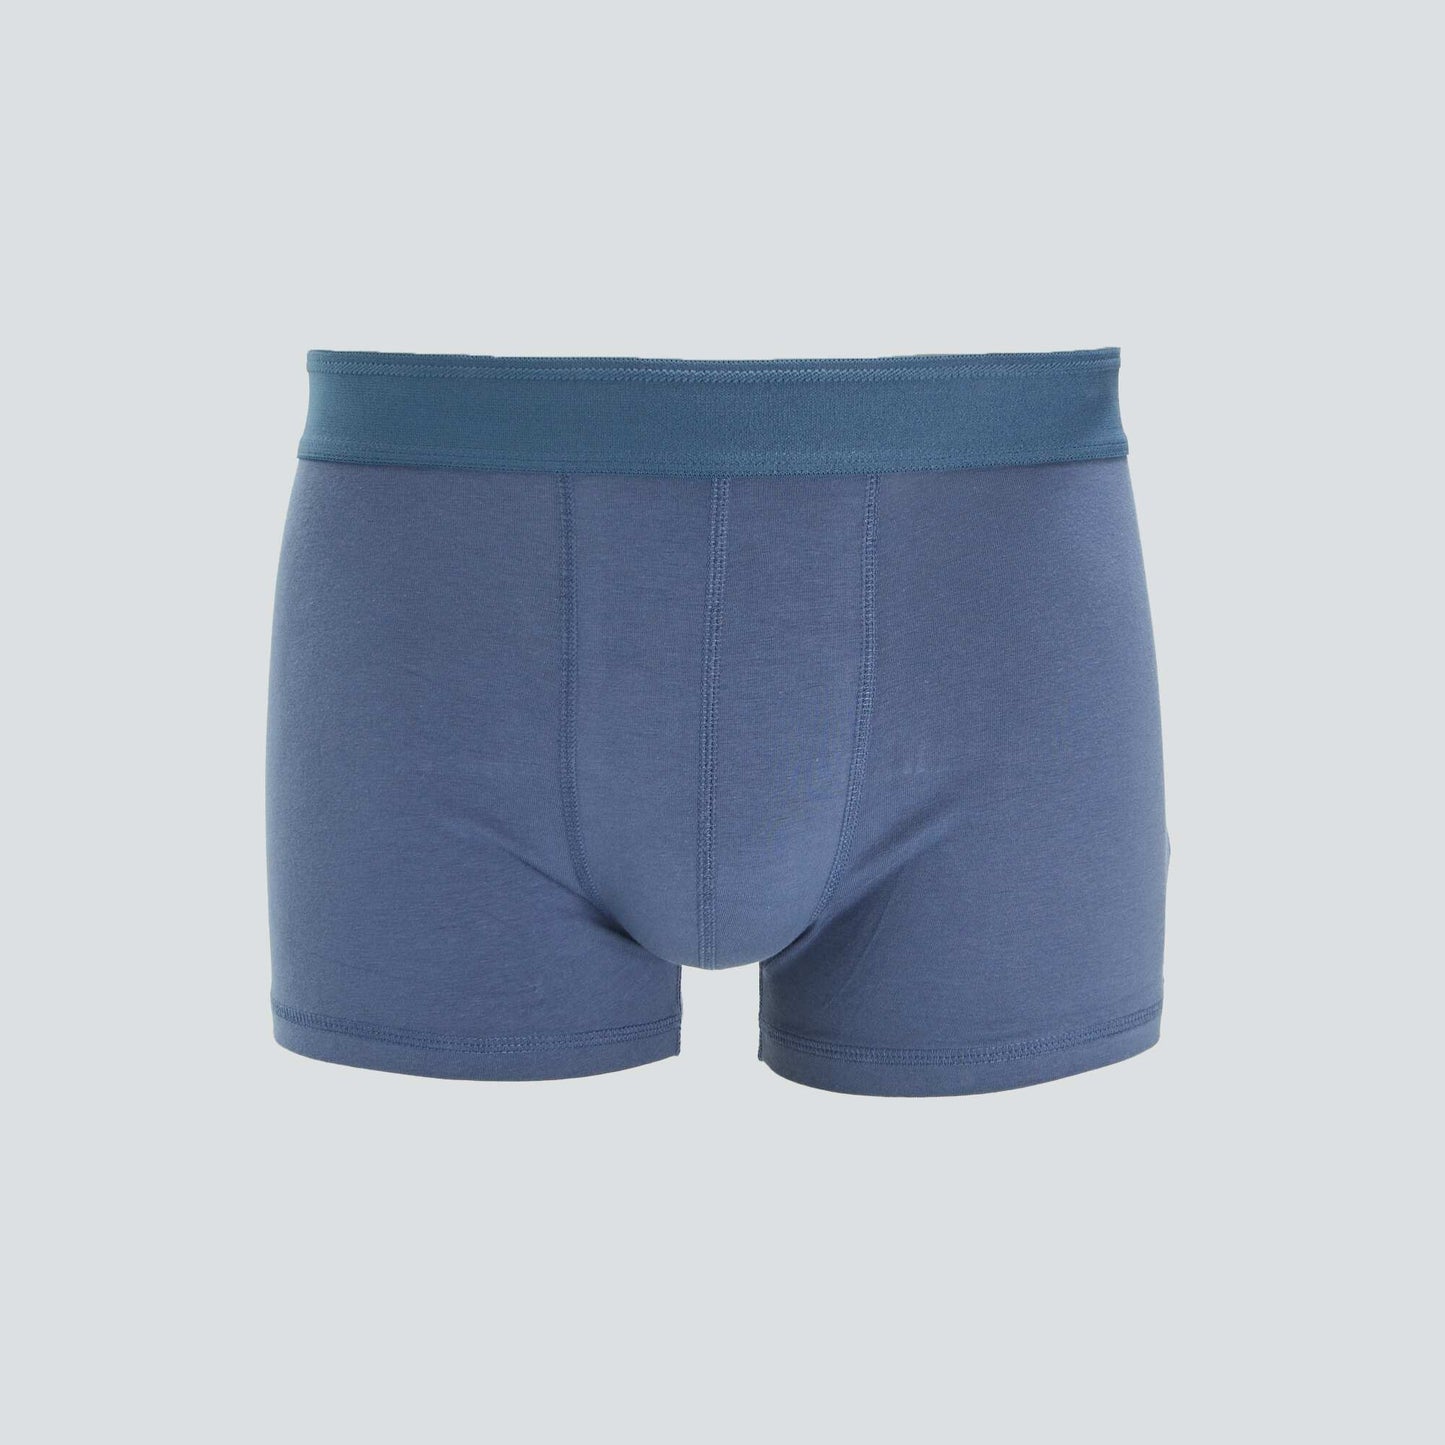 Pack of 3 plain boxers NAVYOCHRE